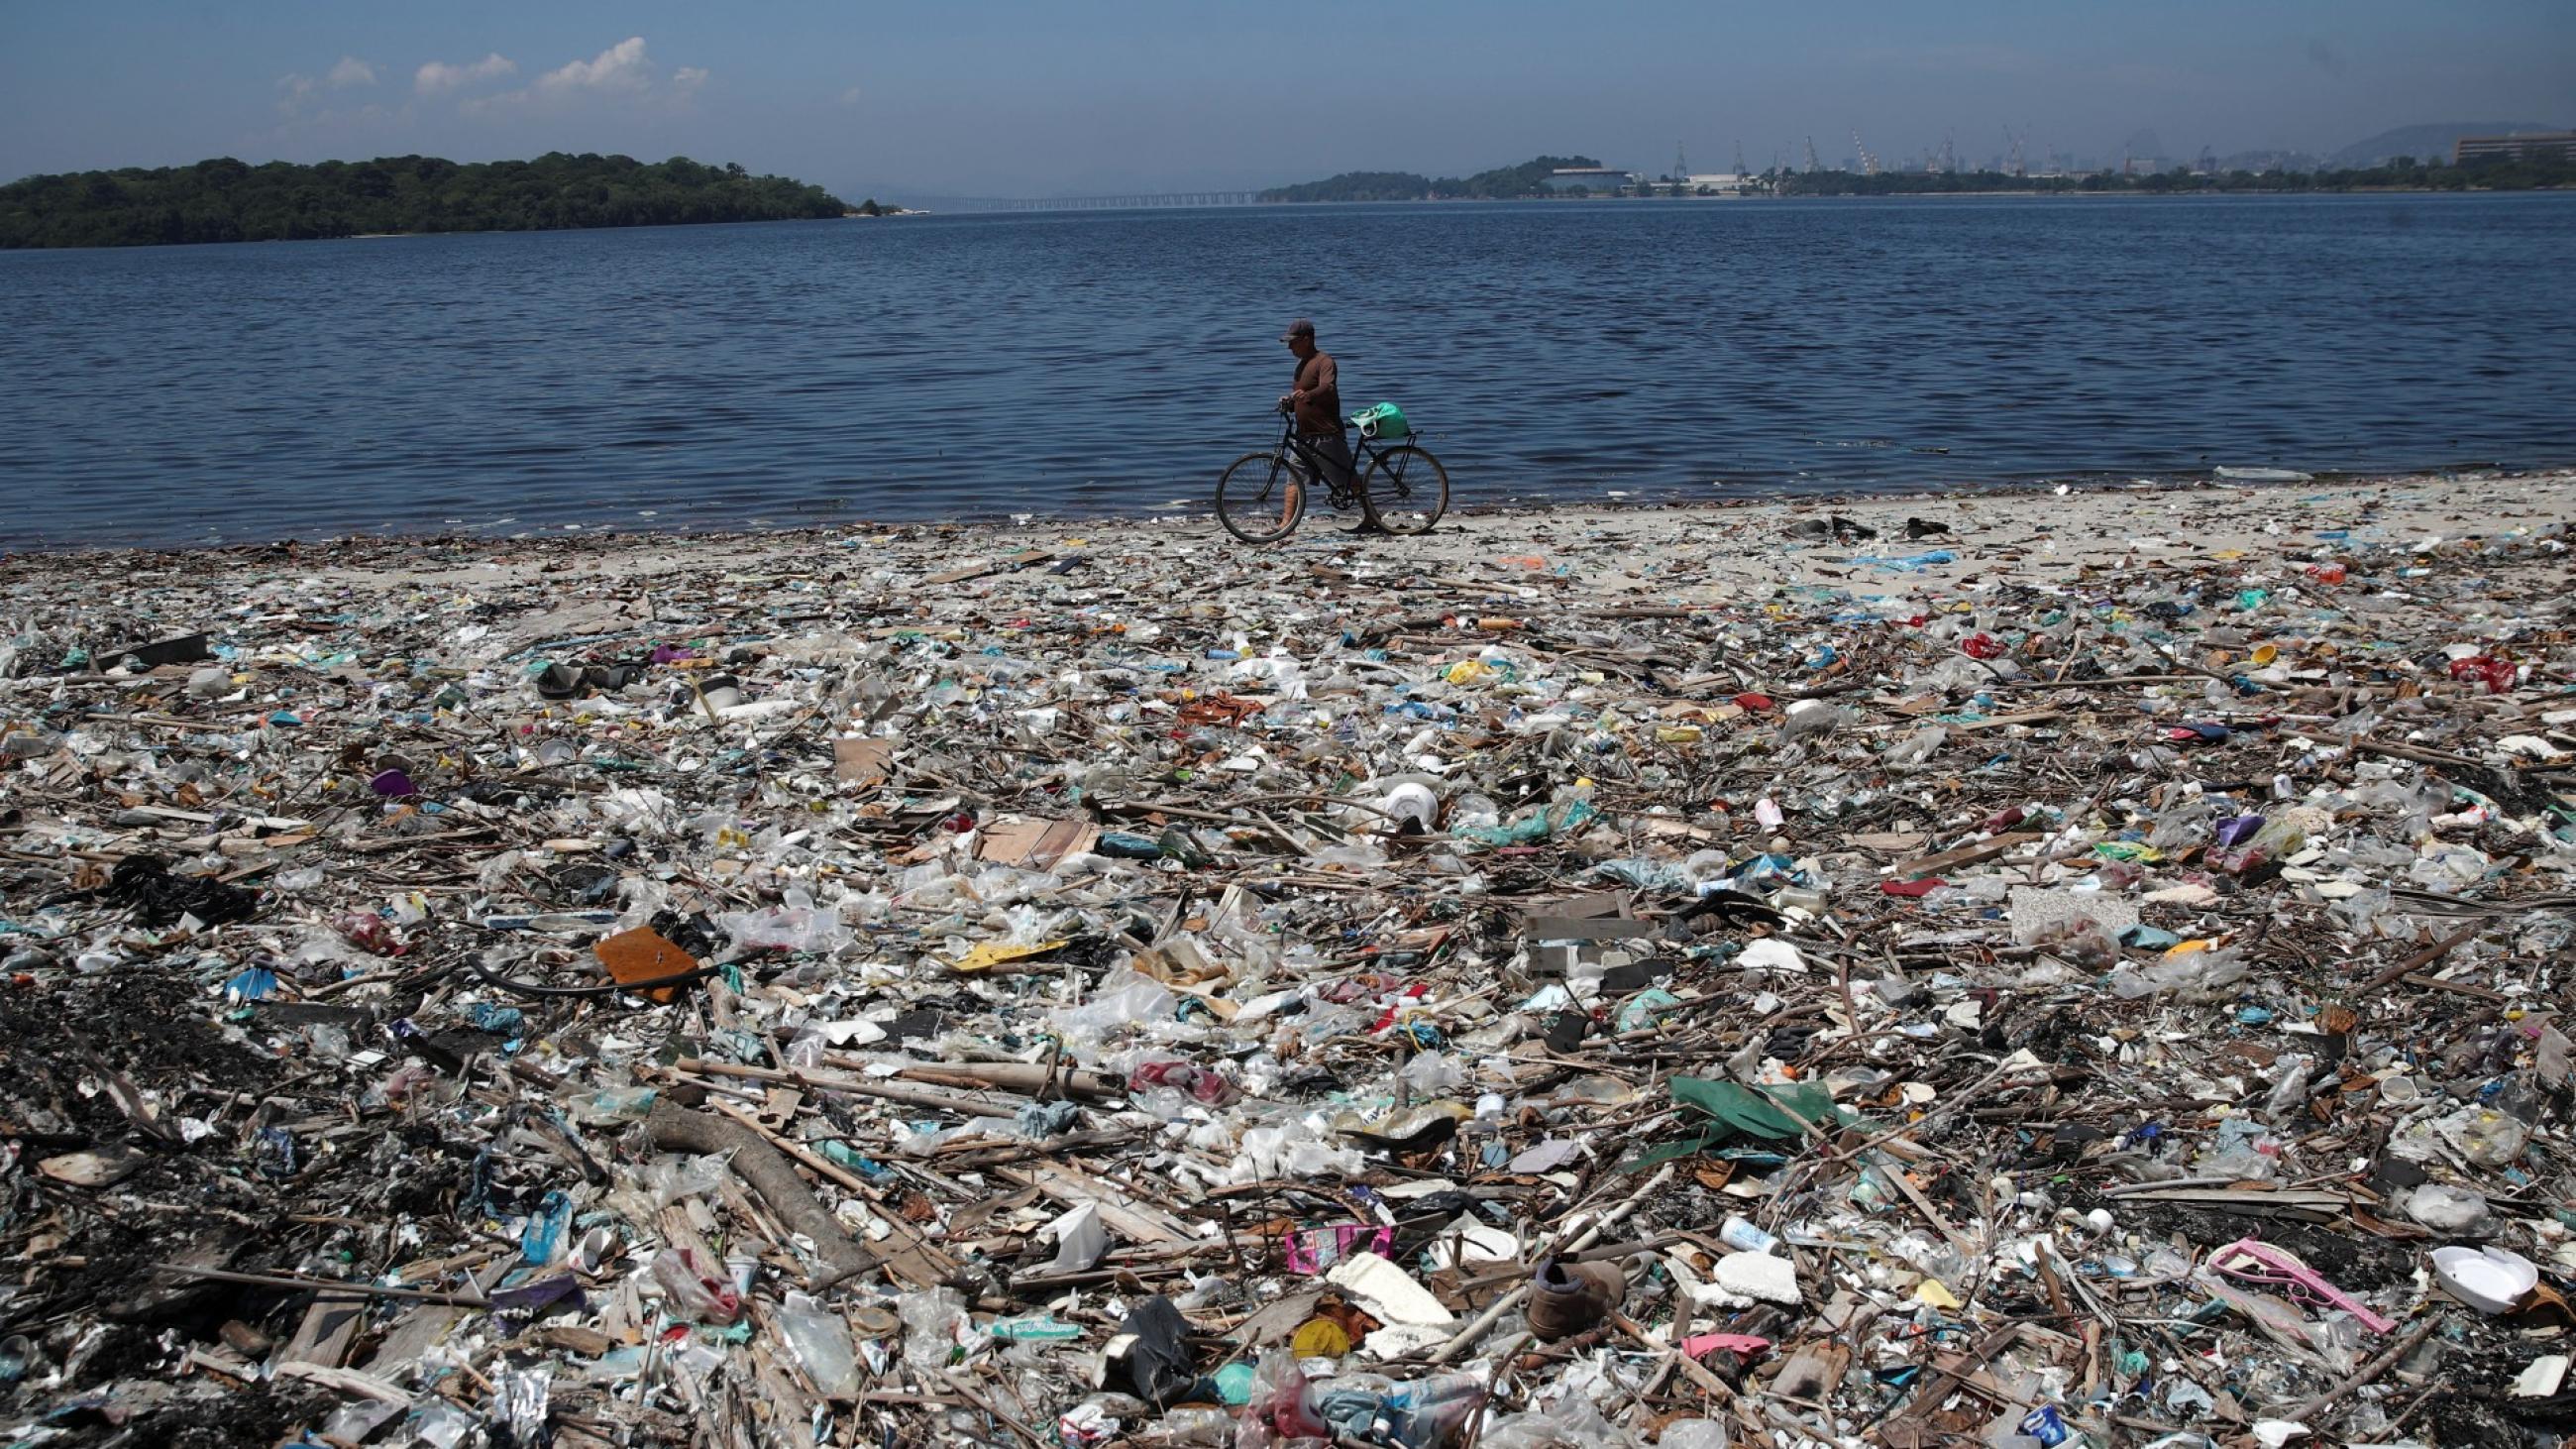 A man walks by plastic waste at a polluted beach on the banks of Guanabara Bay, in Rio de Janeiro, Brazil, on March 16, 2022.